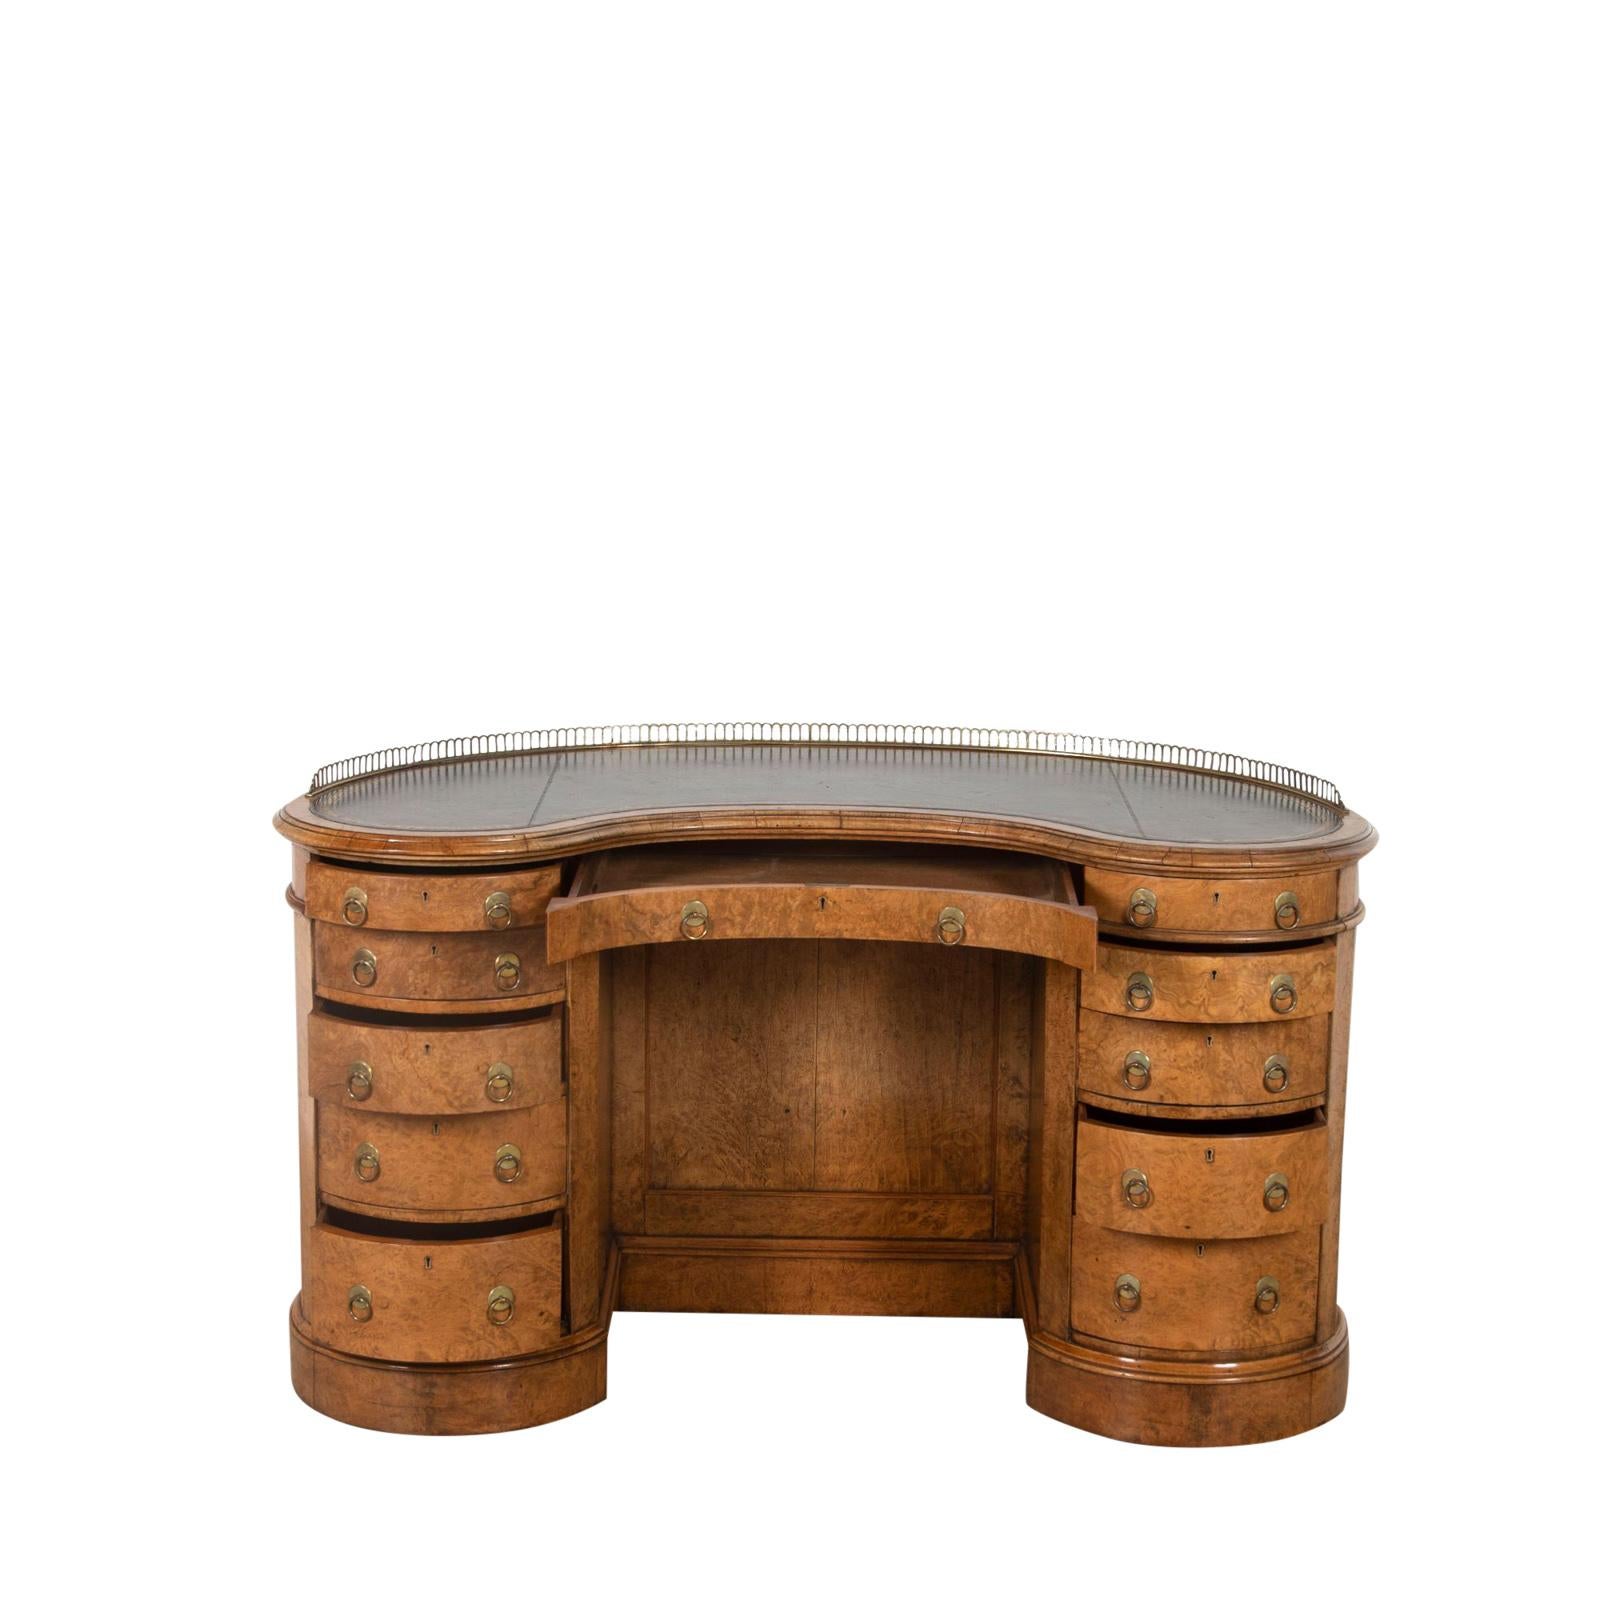 Victorian Gillows Style Kidney Shaped Desk